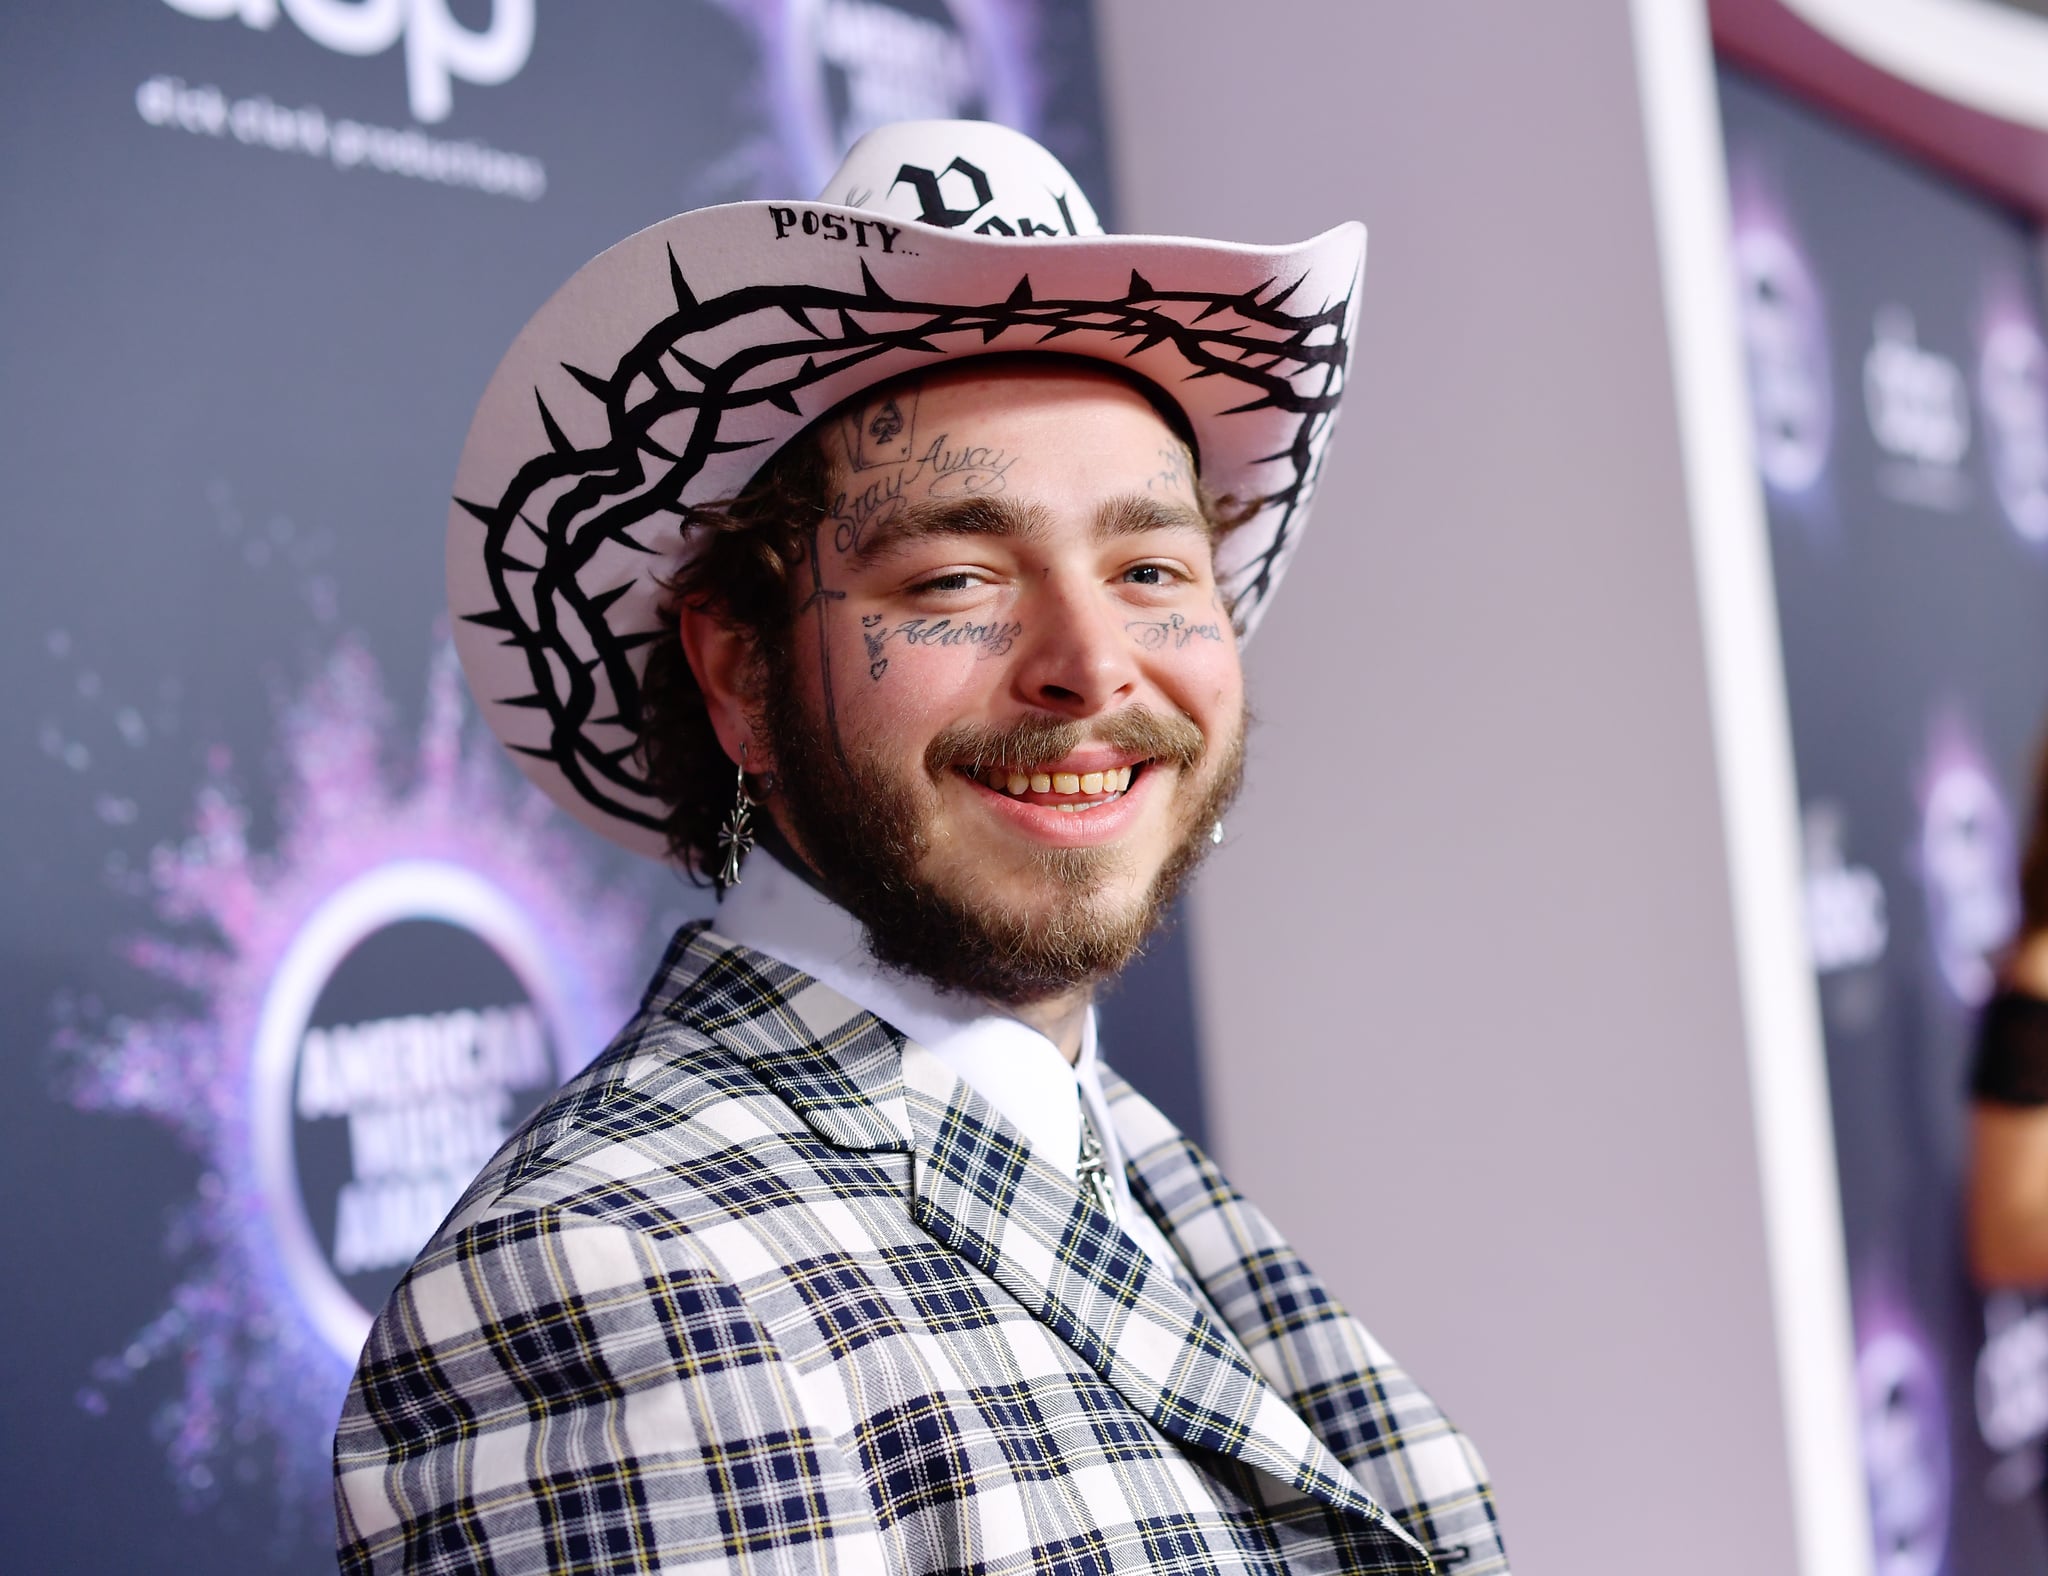 LOS ANGELES, CALIFORNIA - NOVEMBER 24: Post Malone attends the 2019 American Music Awards at Microsoft Theatre on November 24, 2019 in Los Angeles, California. (Photo by Matt Winkelmeyer/Getty Images for dcp)